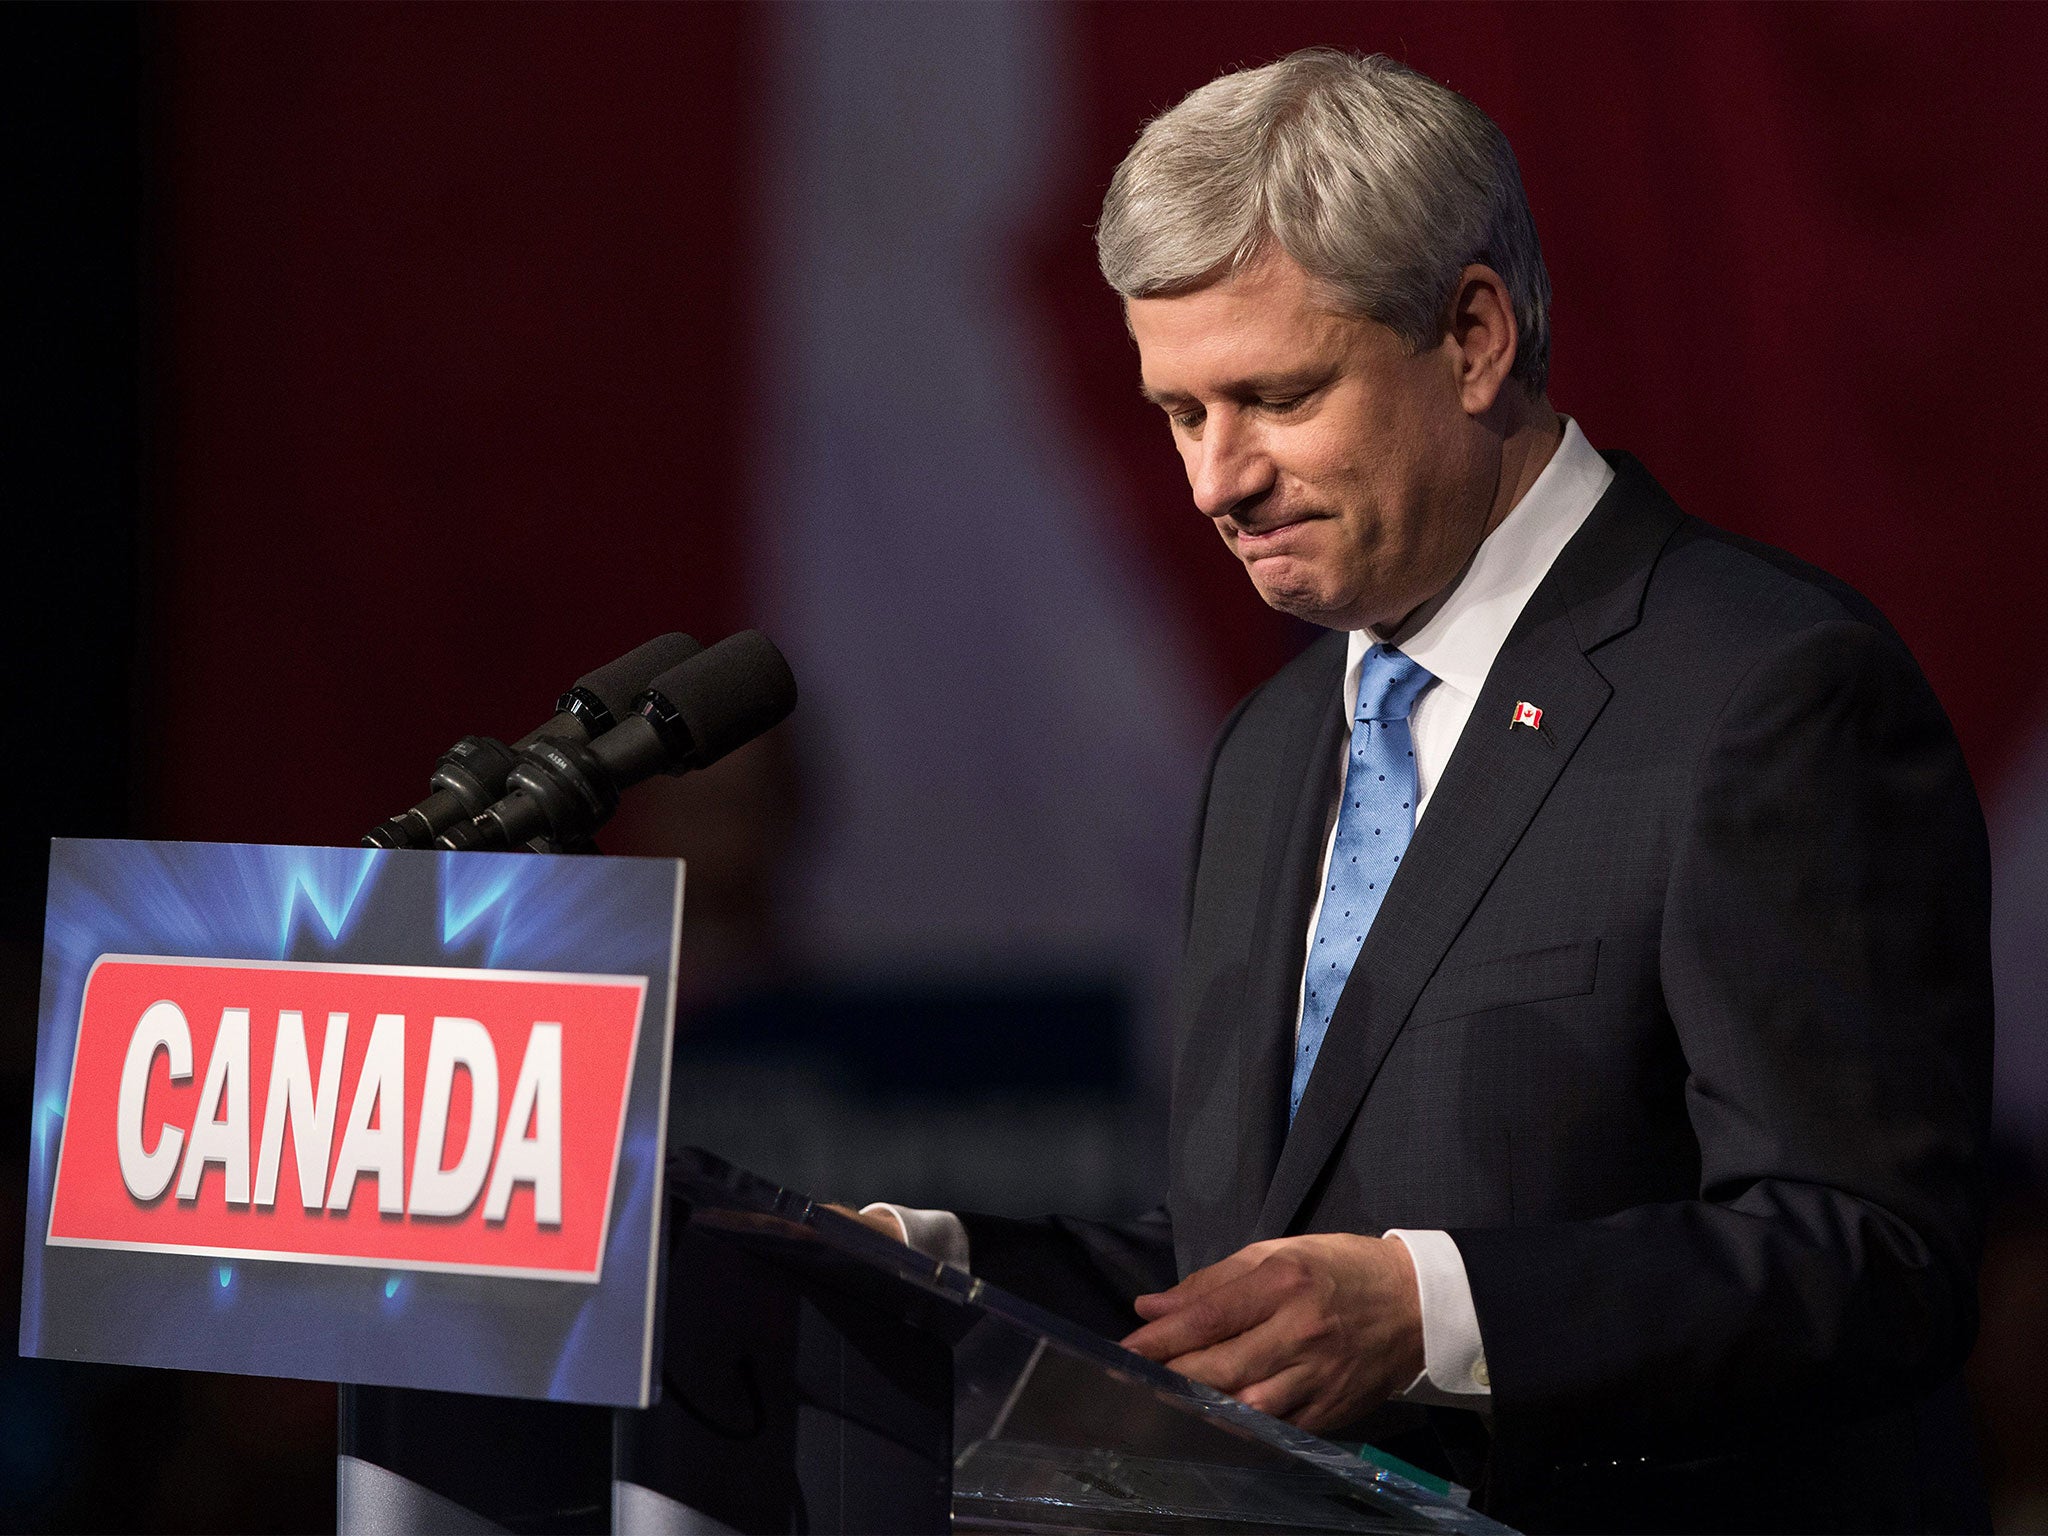 Cult of ignorance: the silencing of federal scientists by Stephen Harper became a prominent election issue in 2015